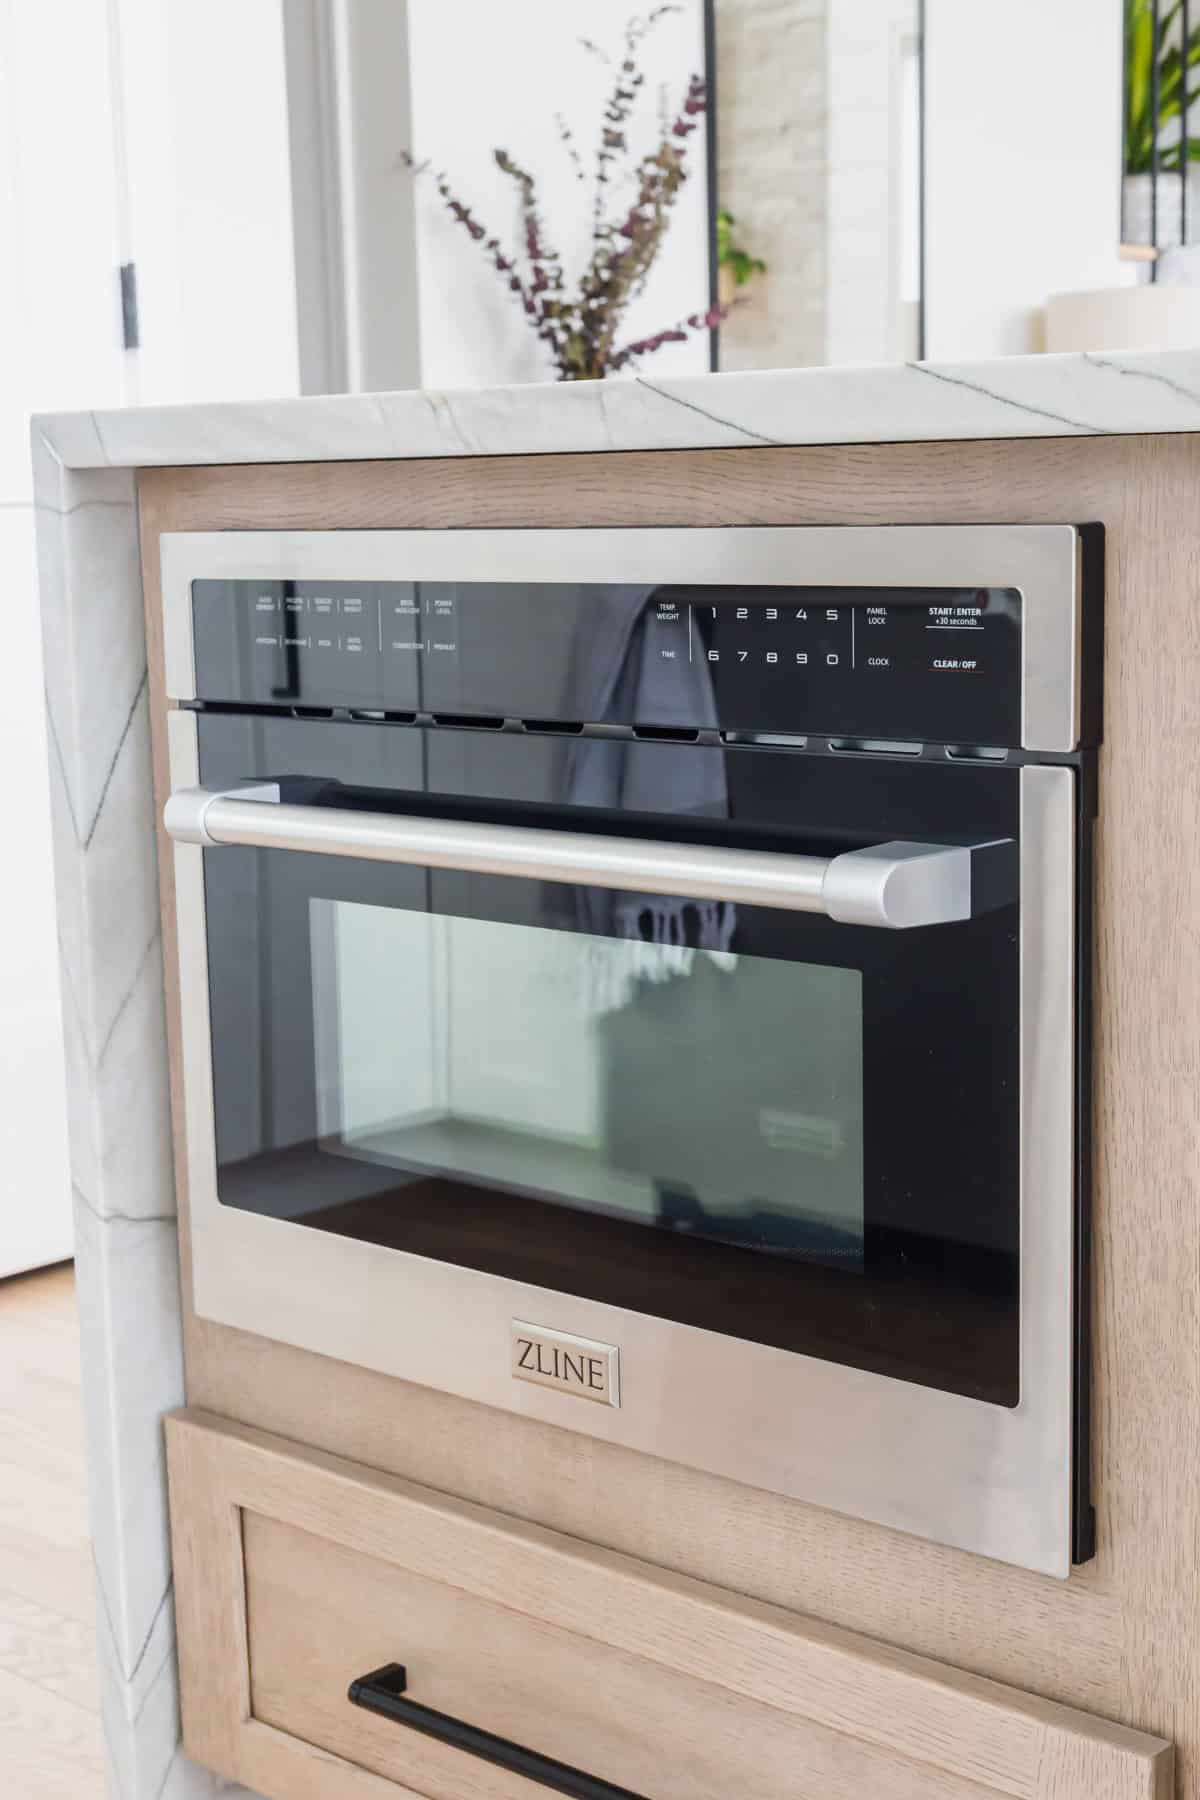 ZLINE MW0-24 built-in convection microwave oven installed in a kitchen island.